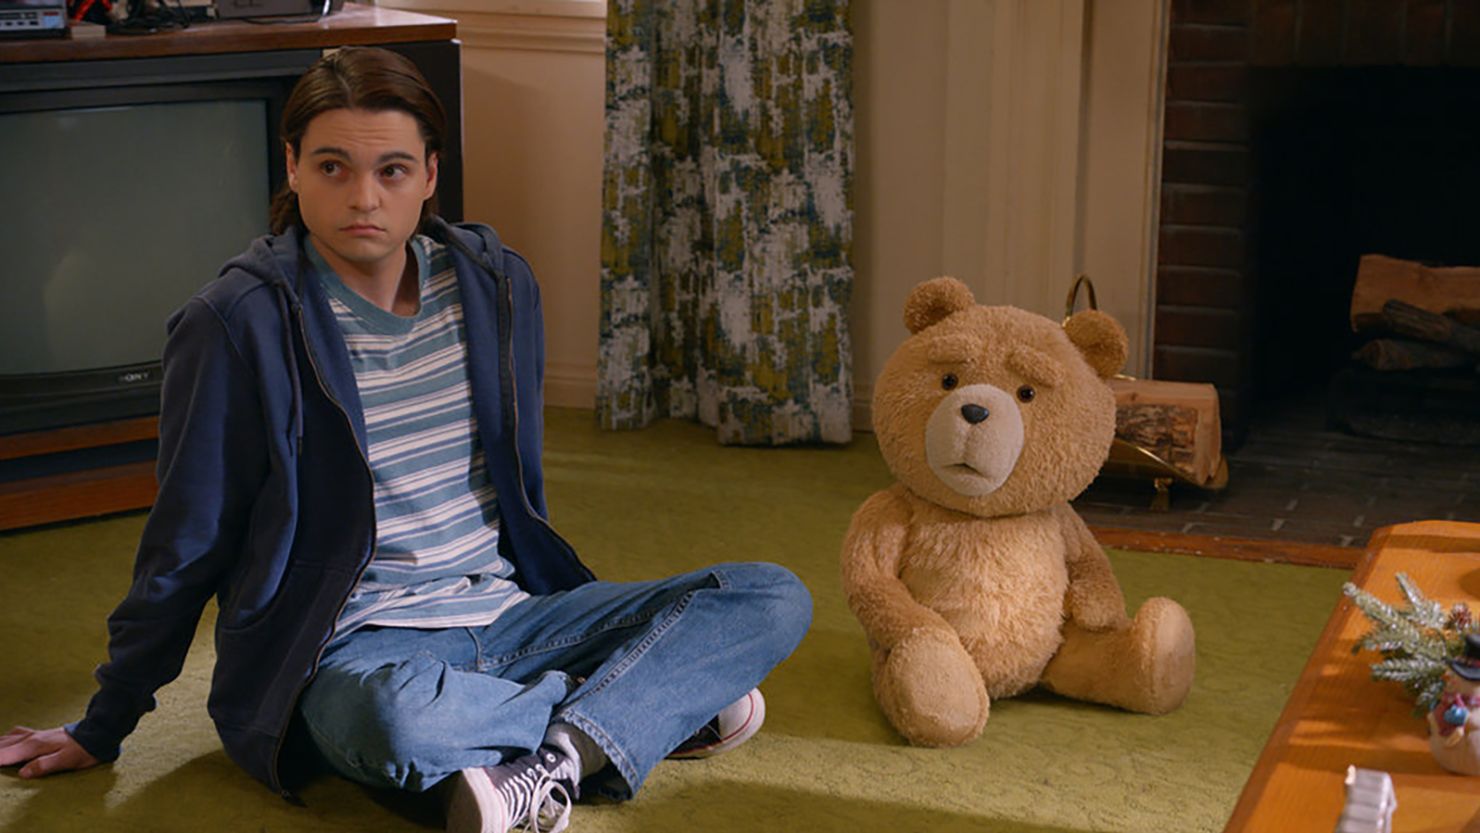 TED -- "Loud Night" Episode 106 -- Pictured: (l-r) Max Burkholder as John, Seth MacFarlane as voice of Ted -- (Photo by: PEACOCK)